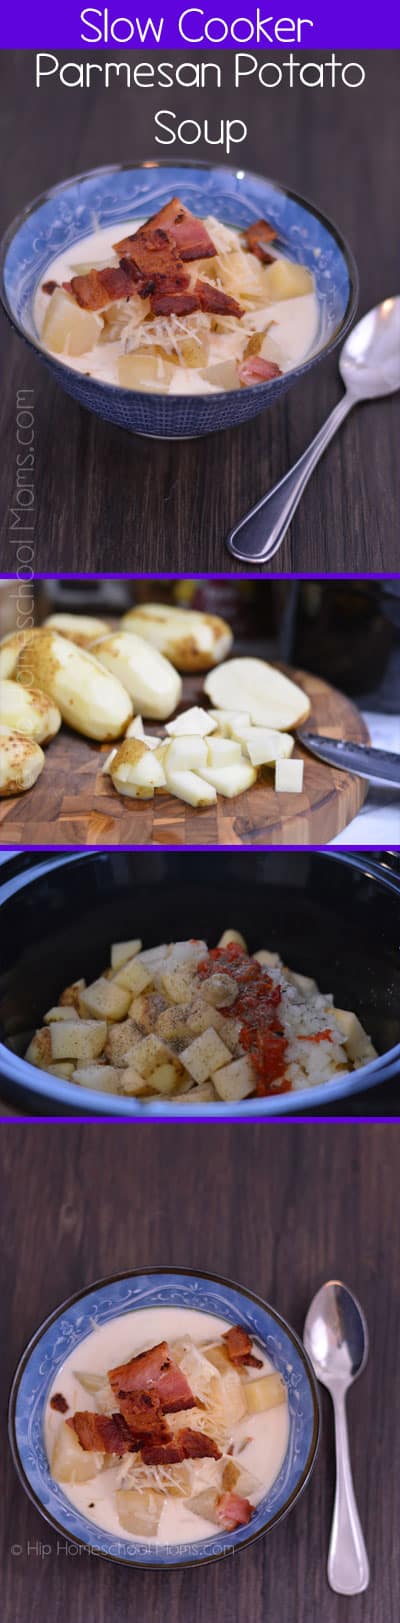 Slow Cooker Parmesan Potato Soup from Constance Smith at Hip Homeschool Moms